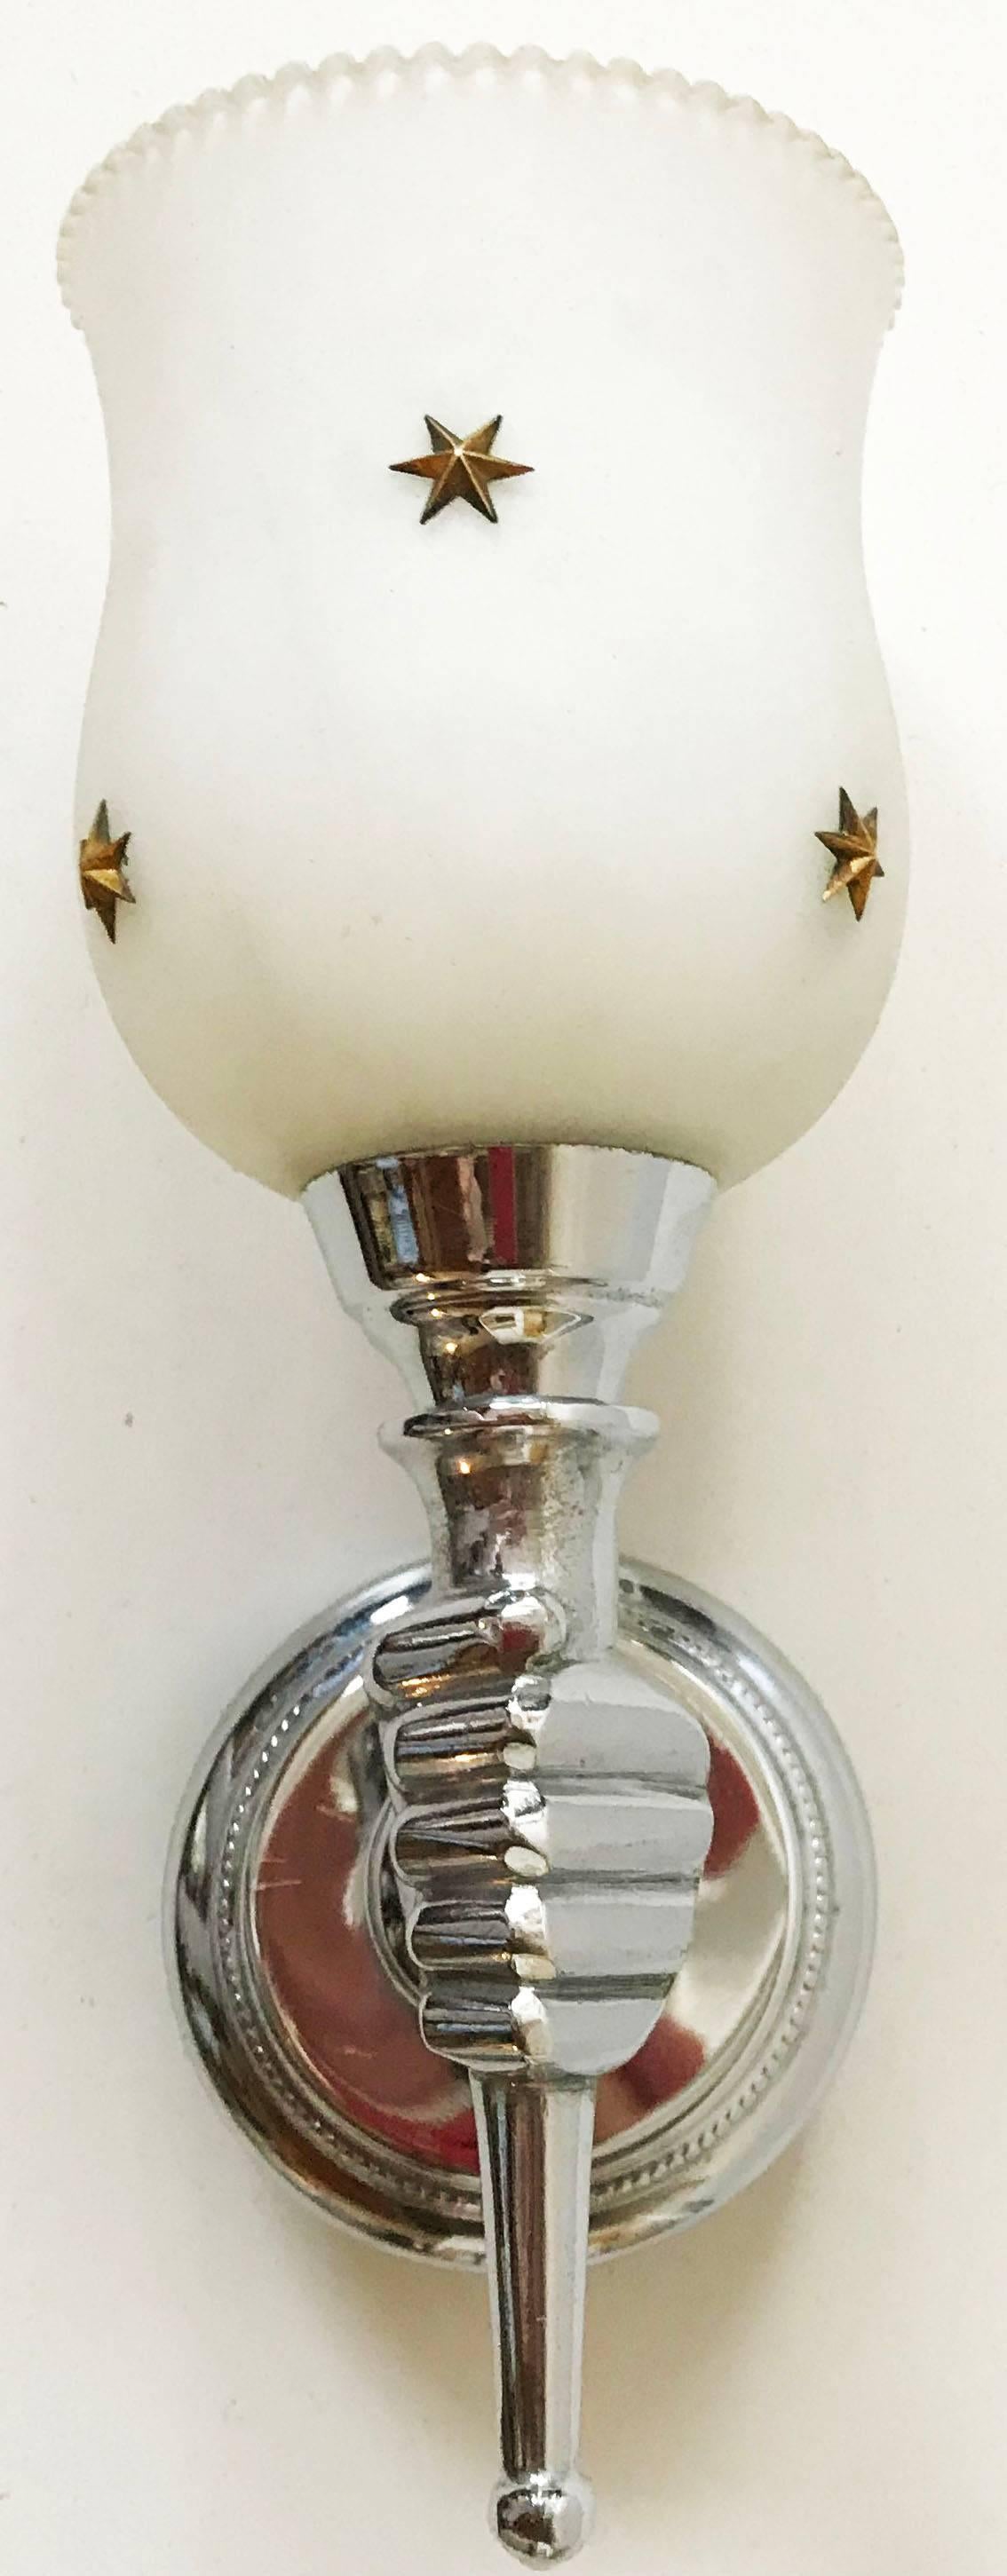 Superb pair of sconces by Andre Arbus figuring a nickel-plated hand with a opaline shade fitted with brass stars.
Measure: Back plate: 3.5 inches diameter.
Have a look on our impressive collection of French and Italian Mid Century Period